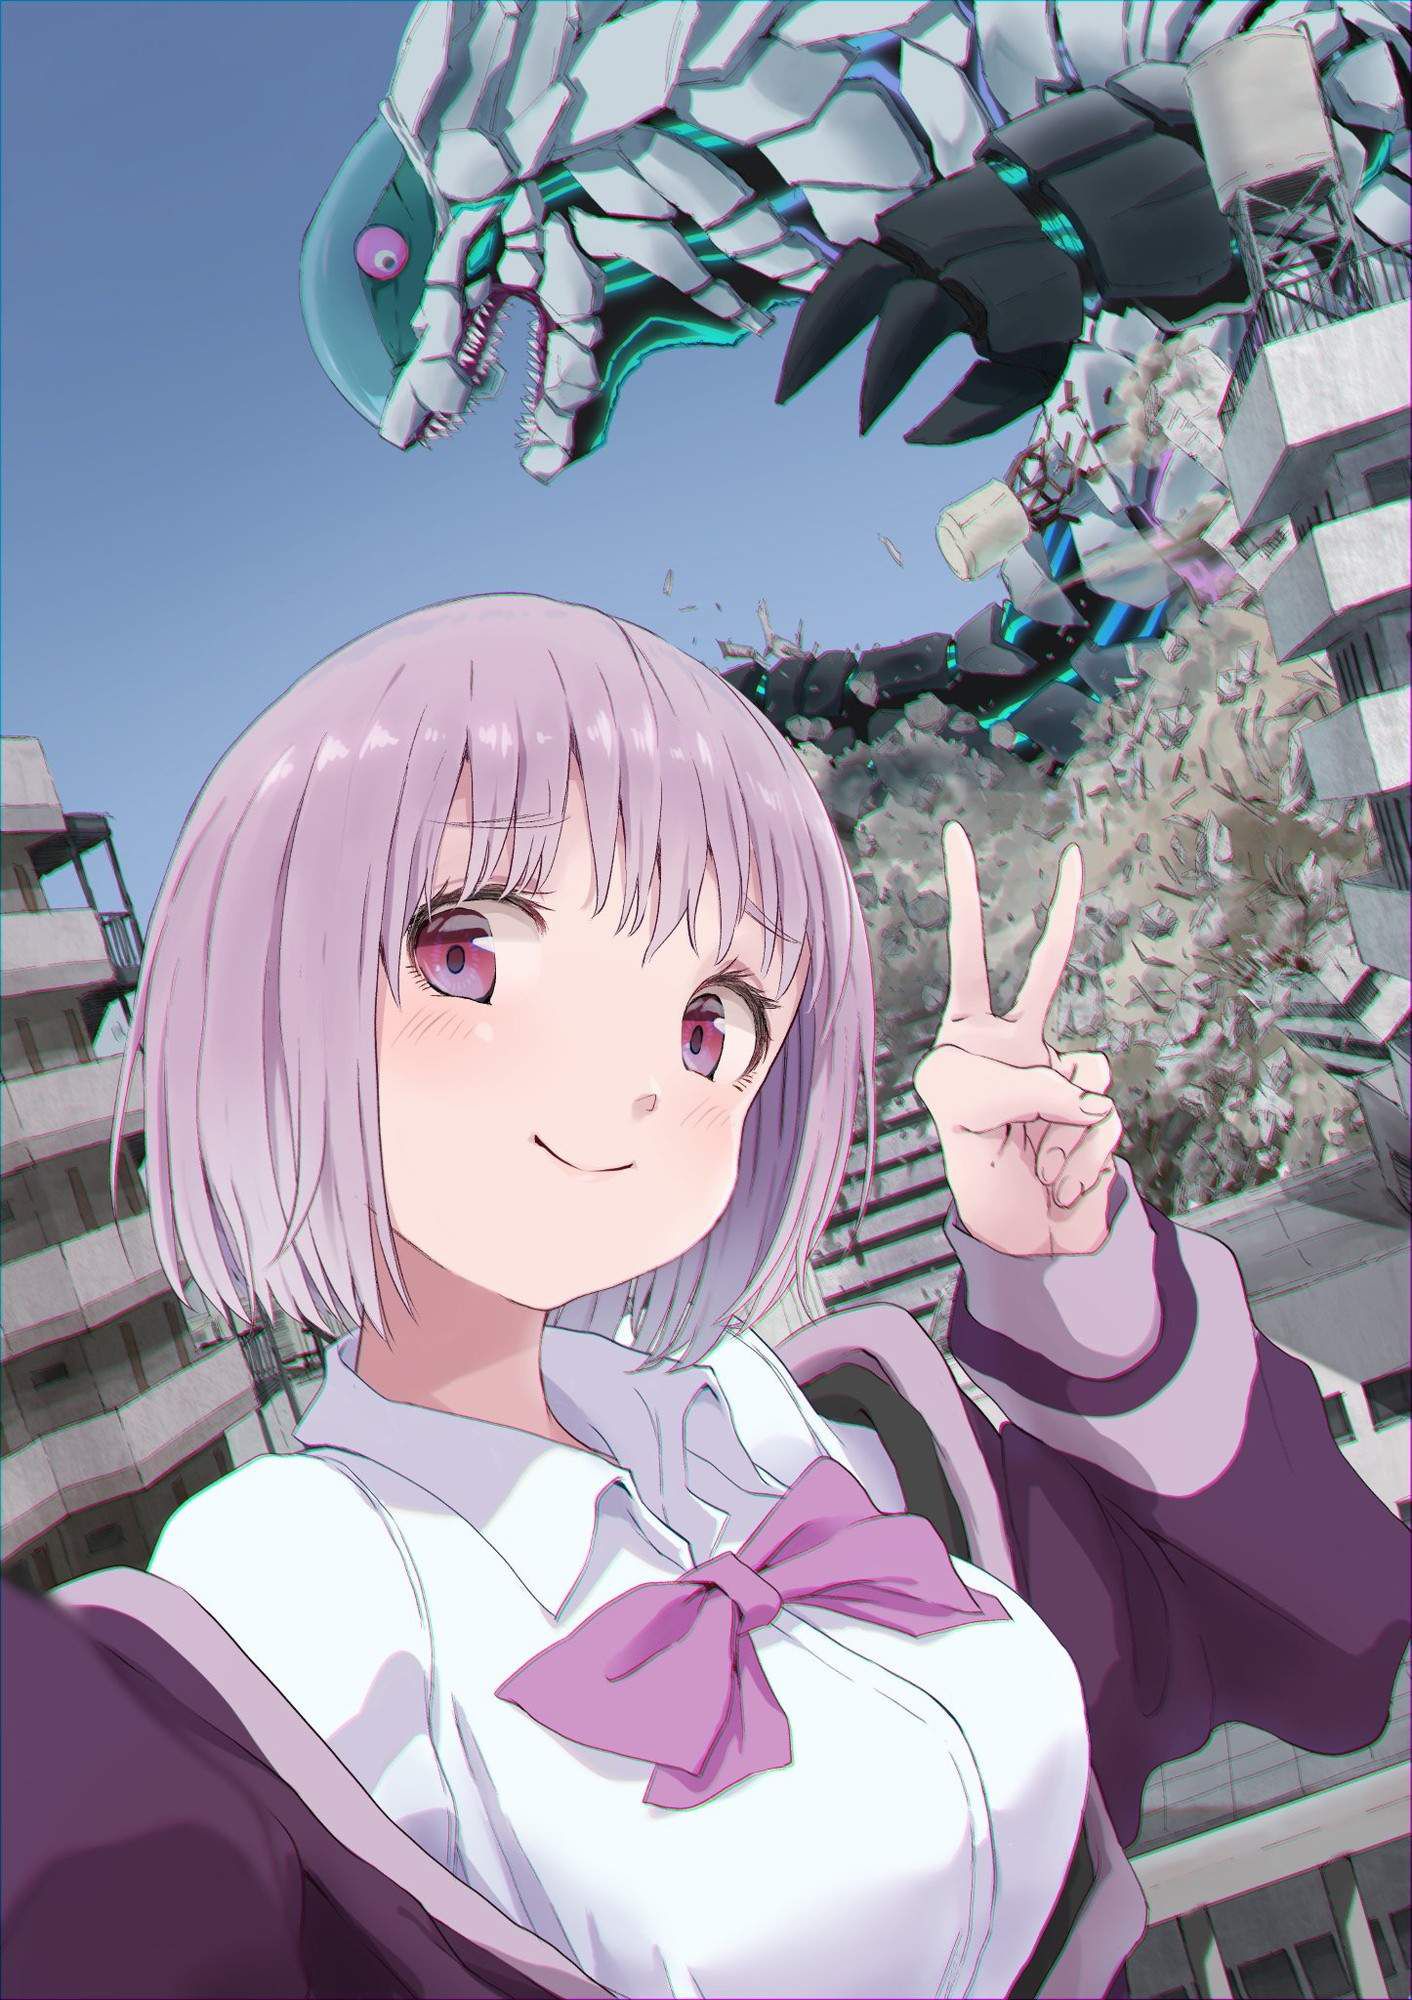 SSSS. Please take a secondary image with GRIDMAN! 17